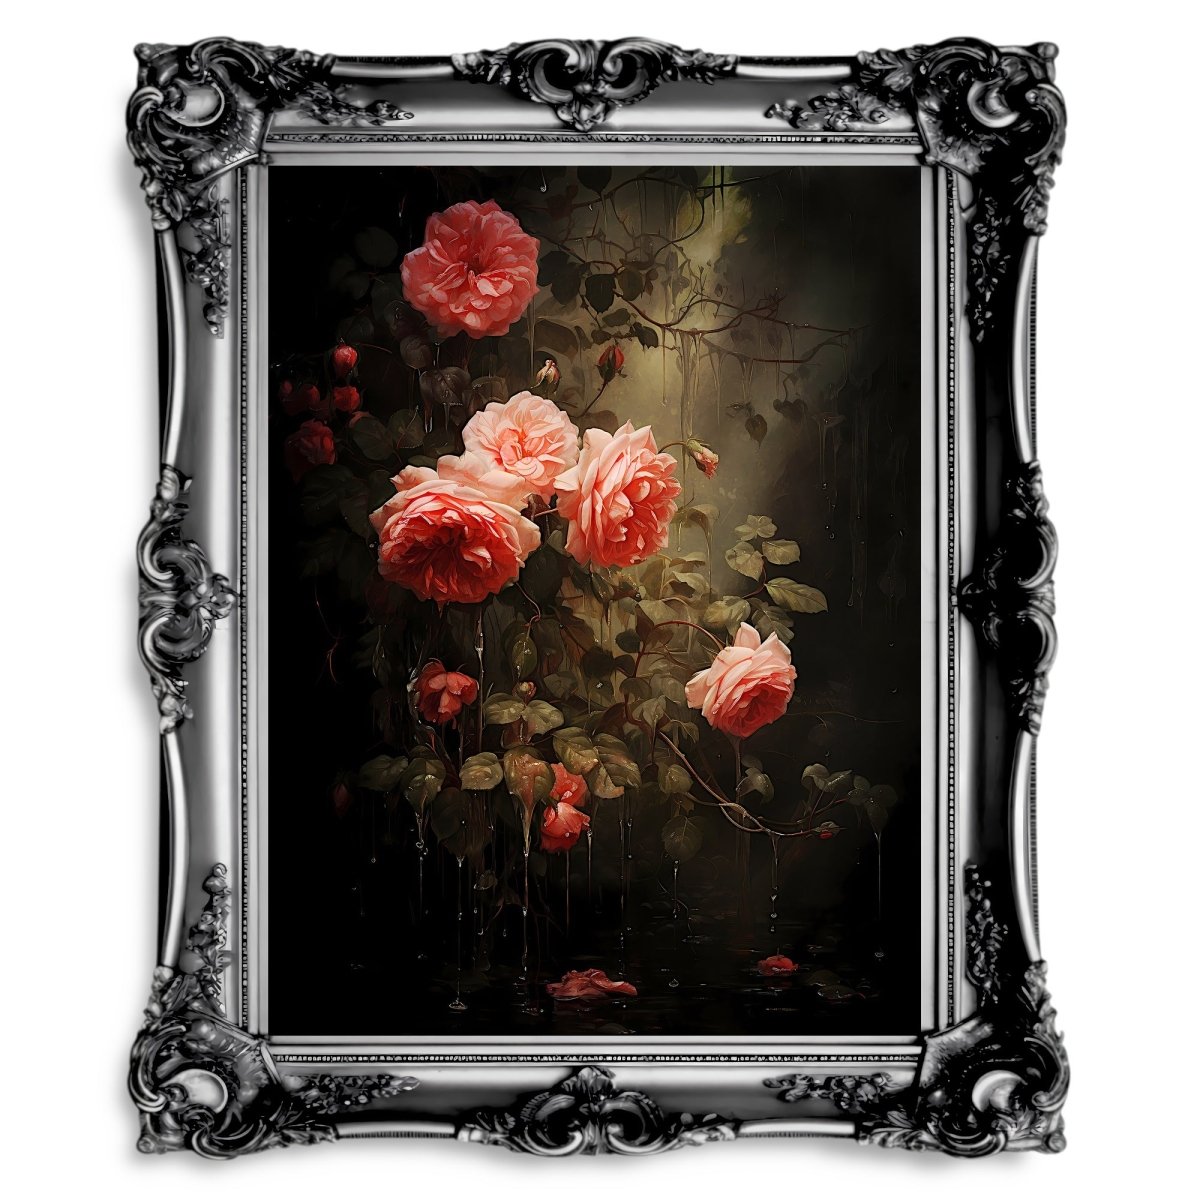 Driping Roses Romantic Woodland Wall Decor Dark Cottagecore - Paper Poster Print - Everything Pixel